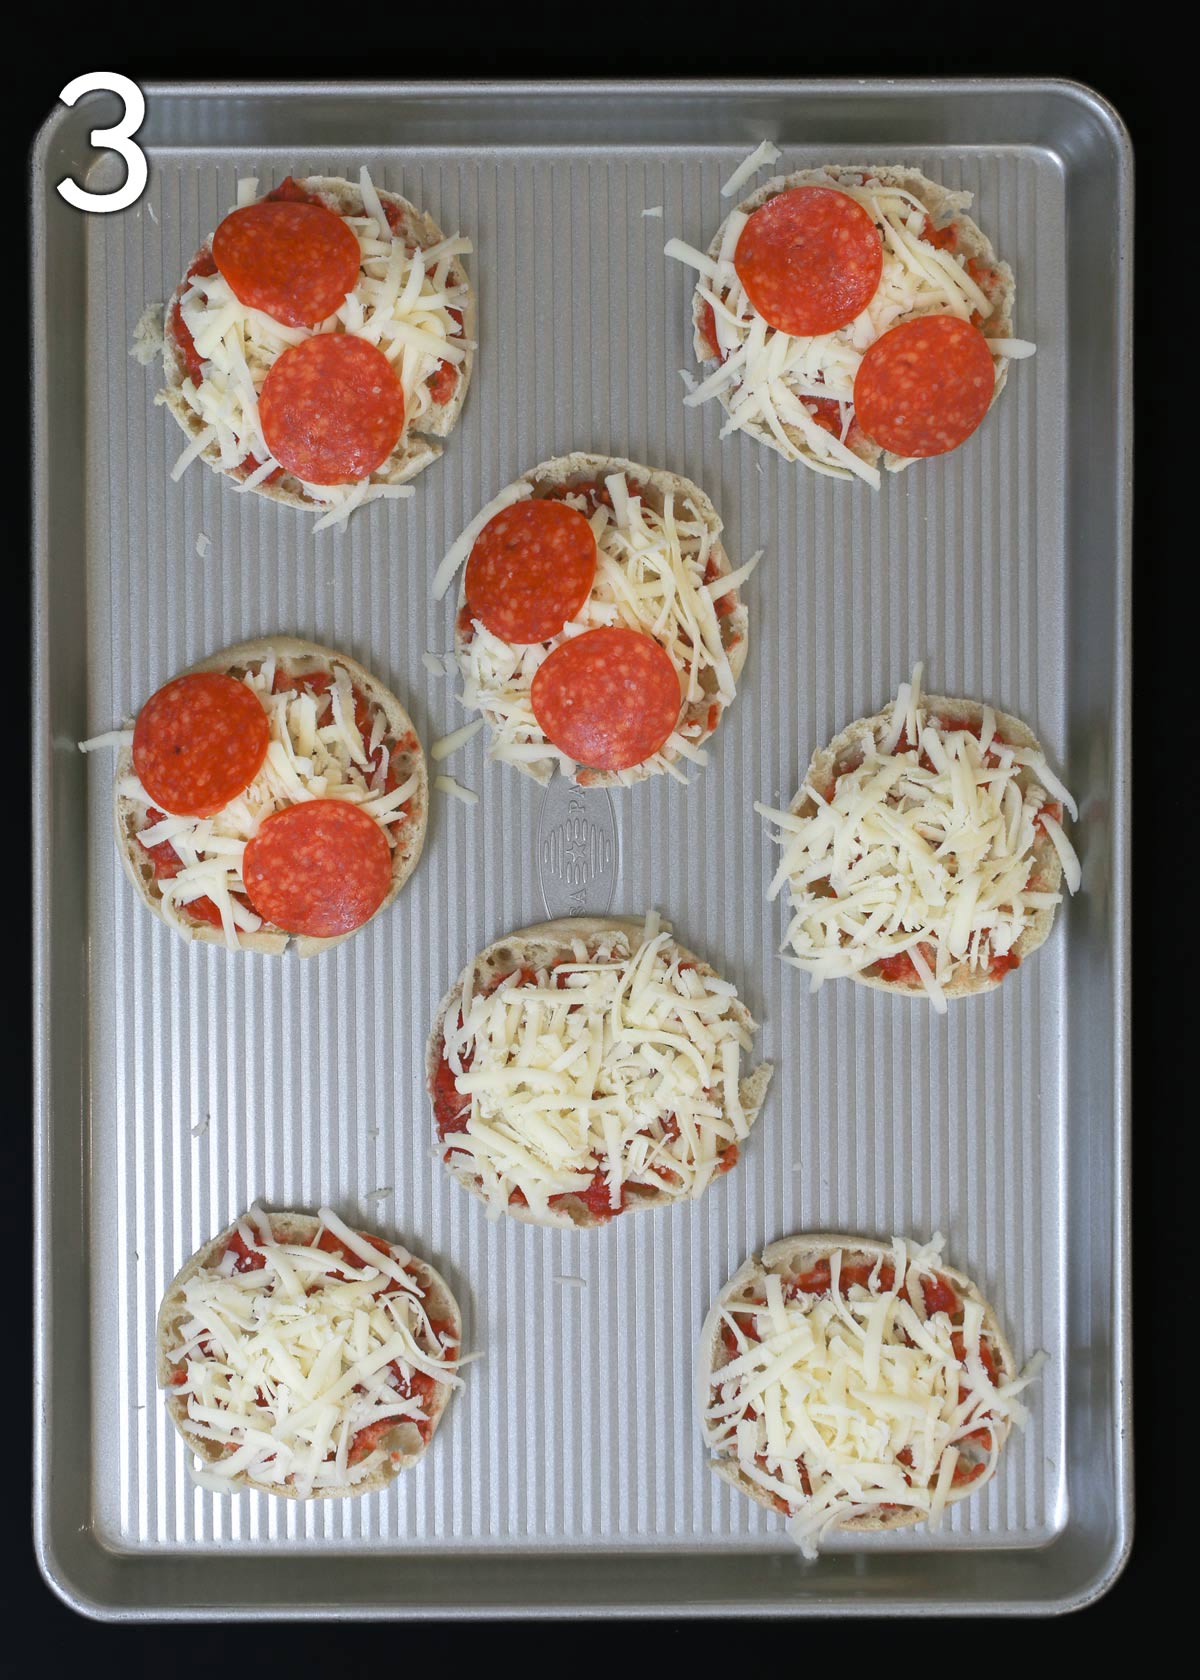 cheese and toppings layered on english muffins.